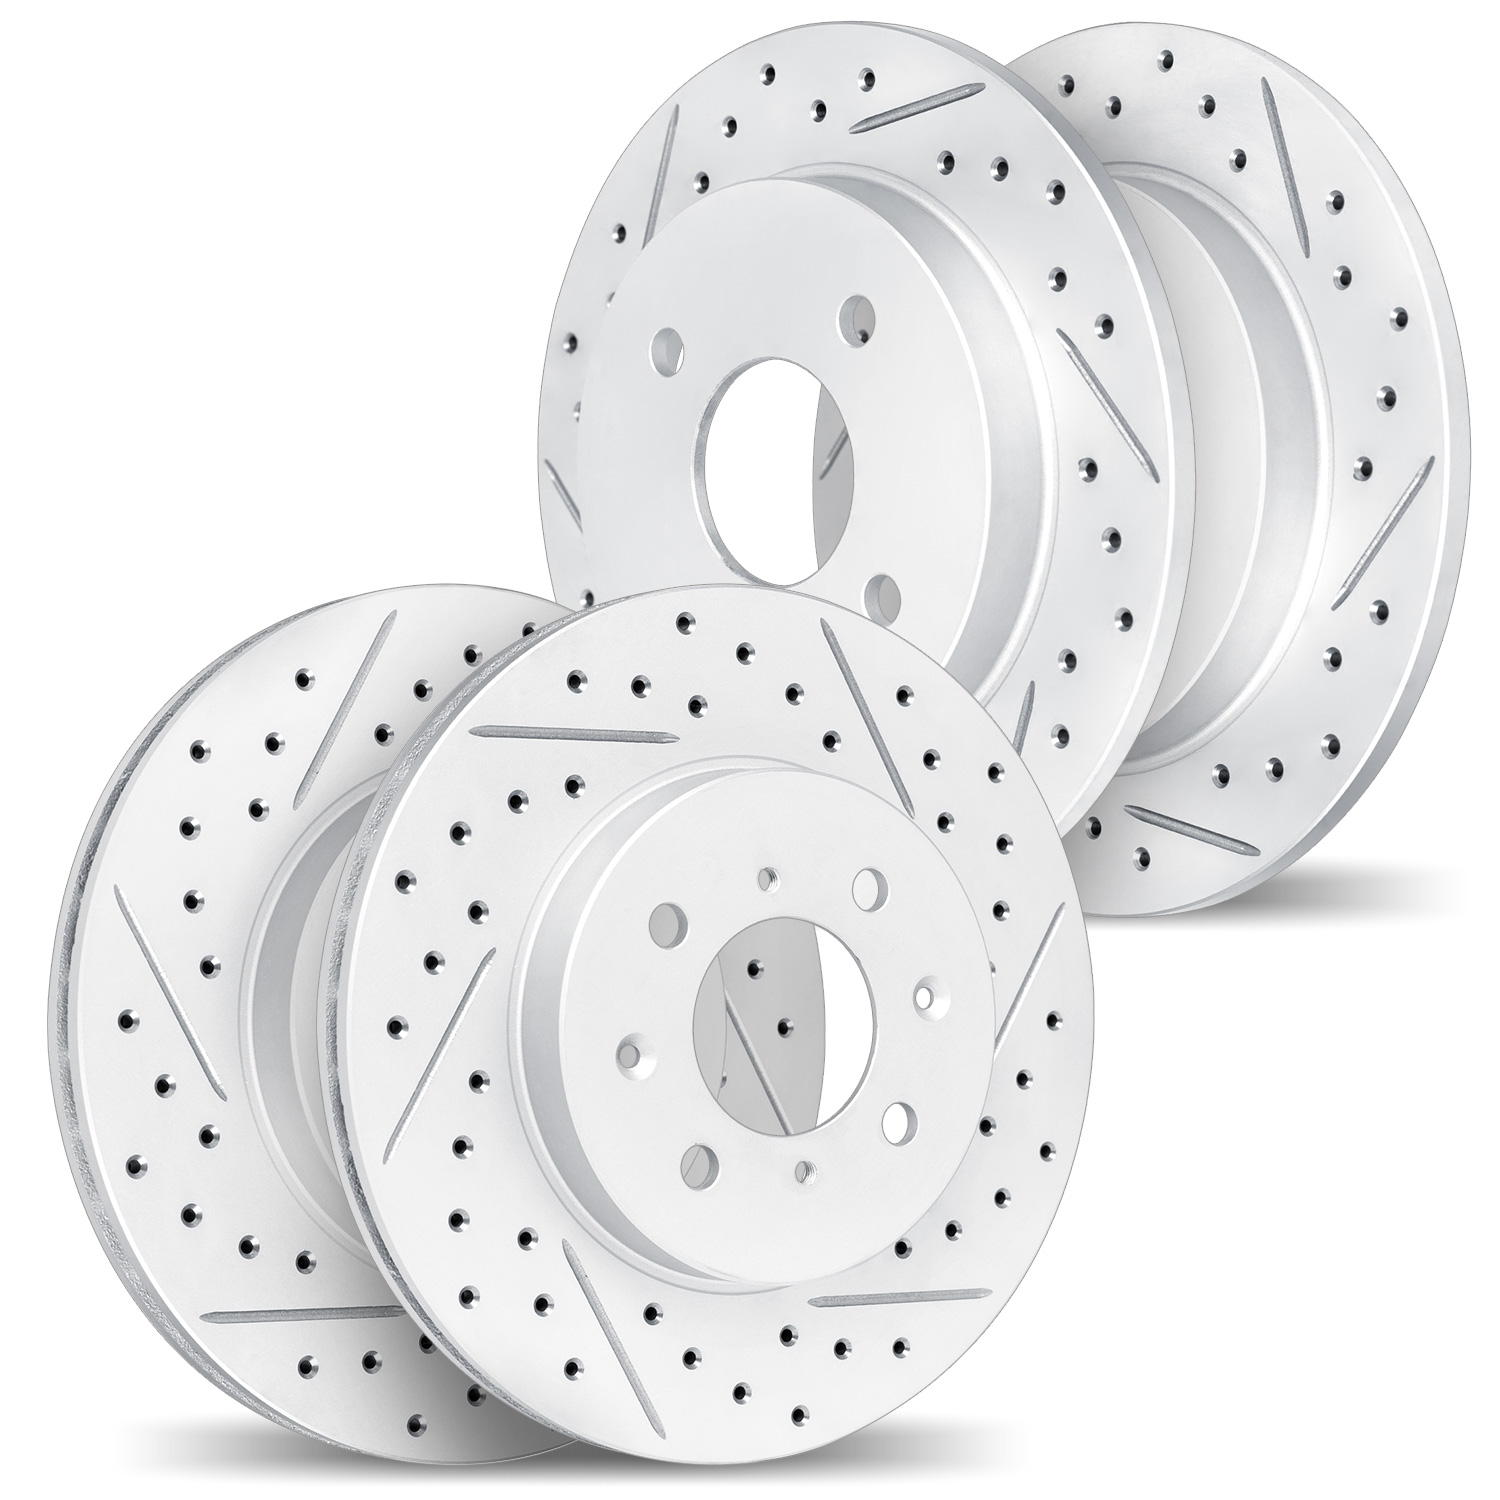 2004-07002 Geoperformance Drilled/Slotted Brake Rotors, 2009-2019 Mopar, Position: Front and Rear